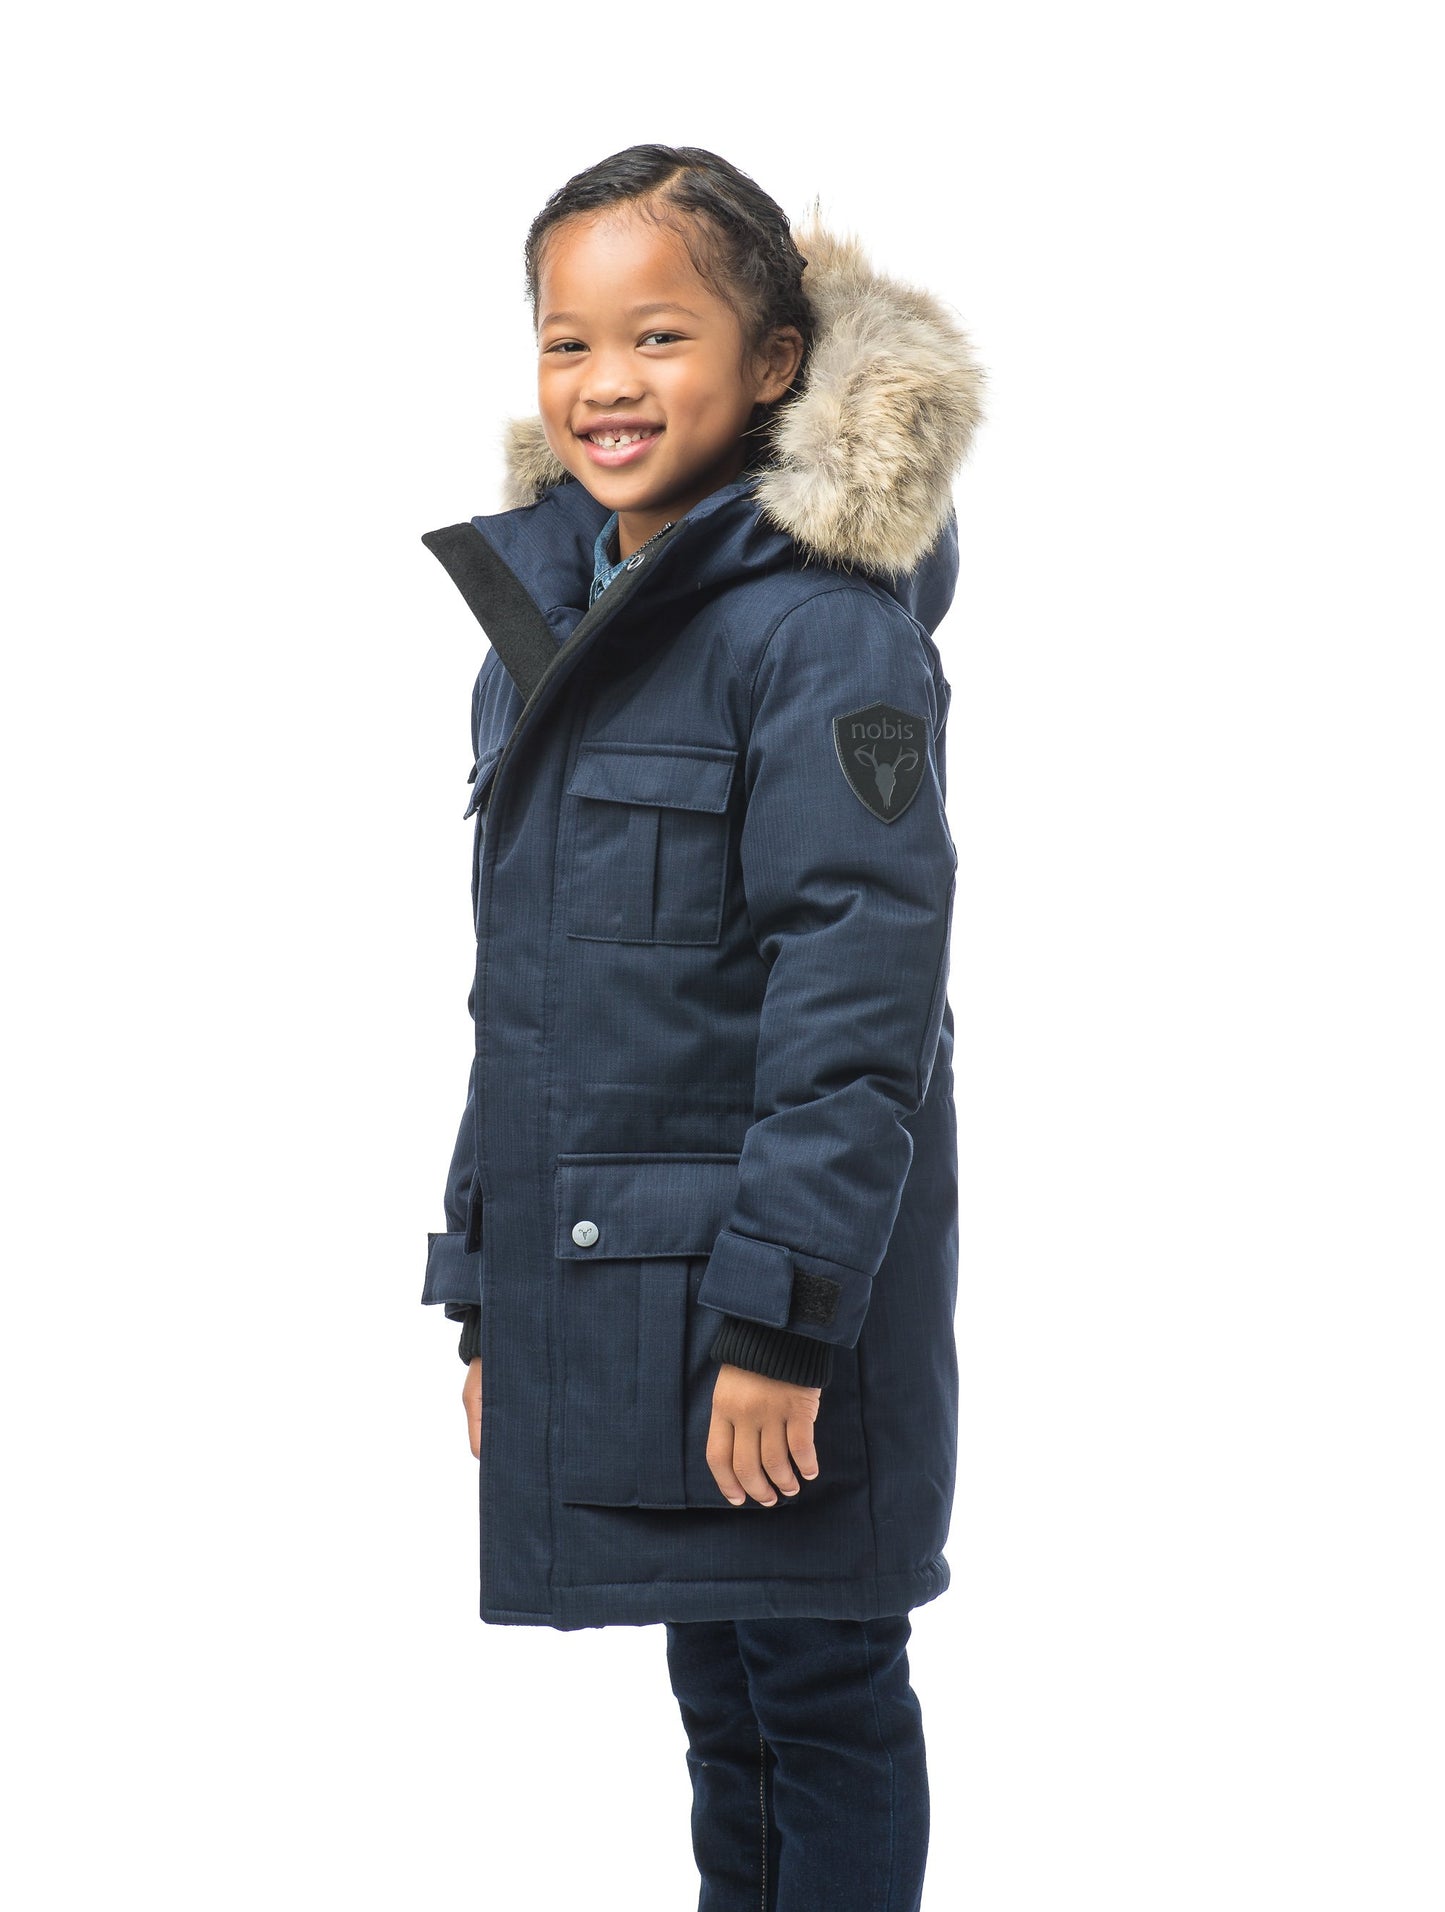 Kid's knee length parka with magnetized closure in CH Navy